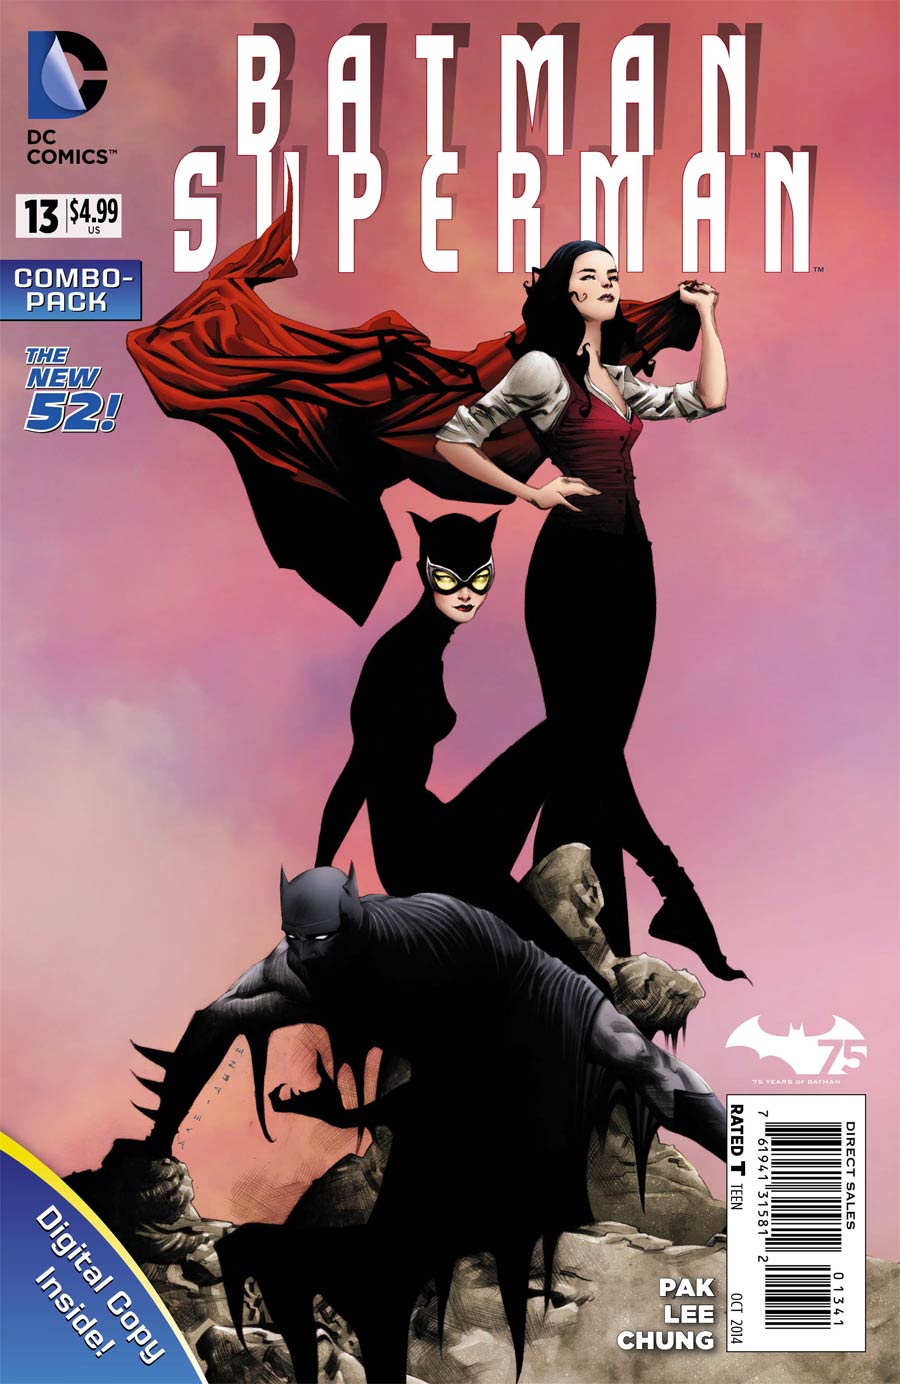 Batman Superman #13 Cover D Combo Pack Without Polybag